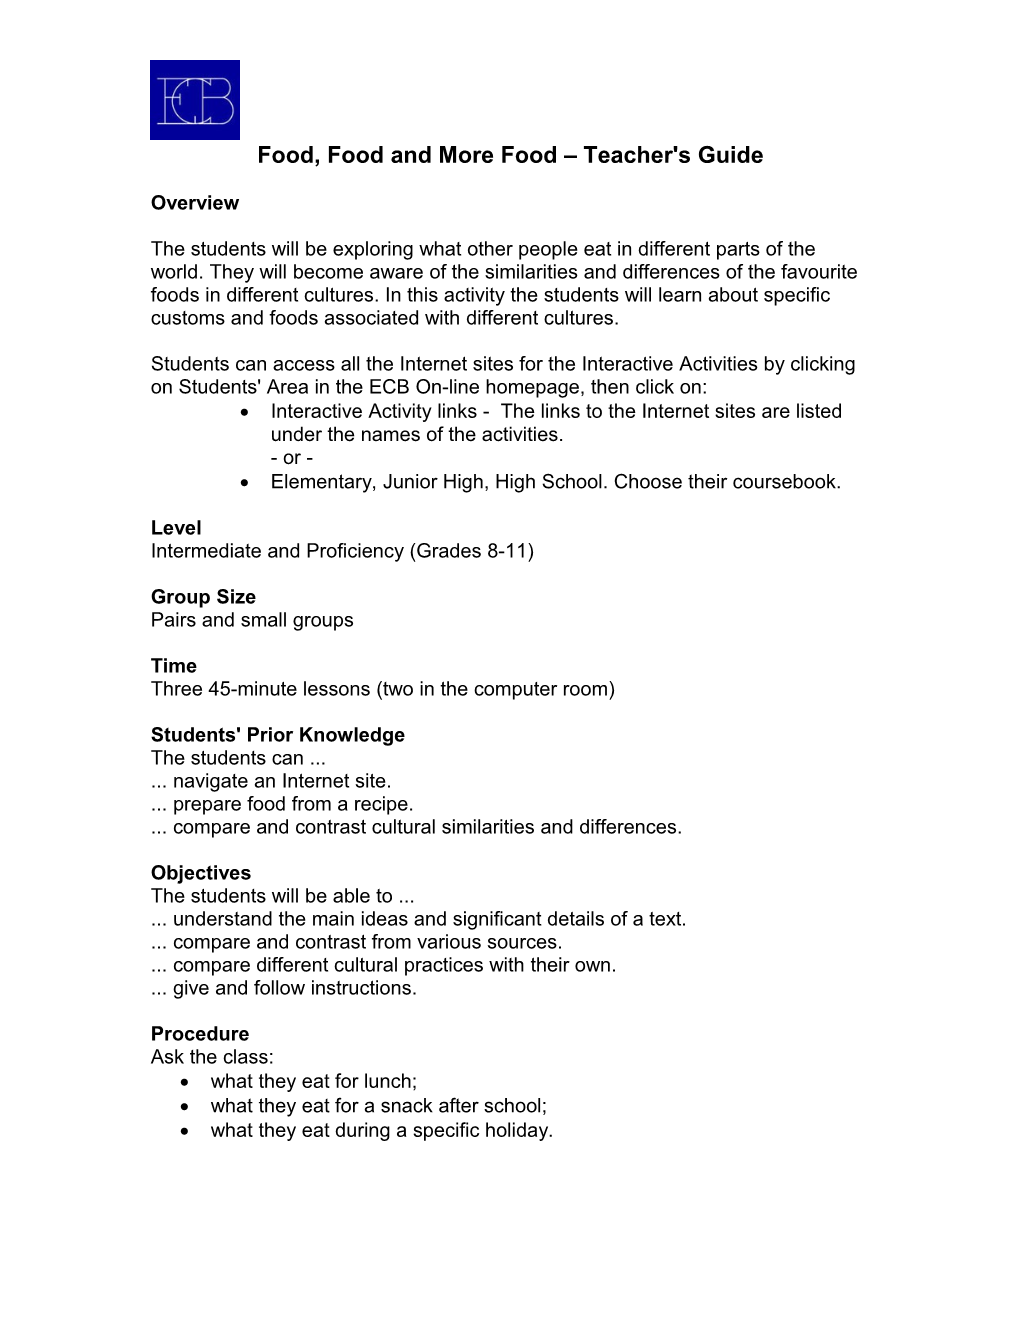 Food, Food and More Food Teacher's Guide